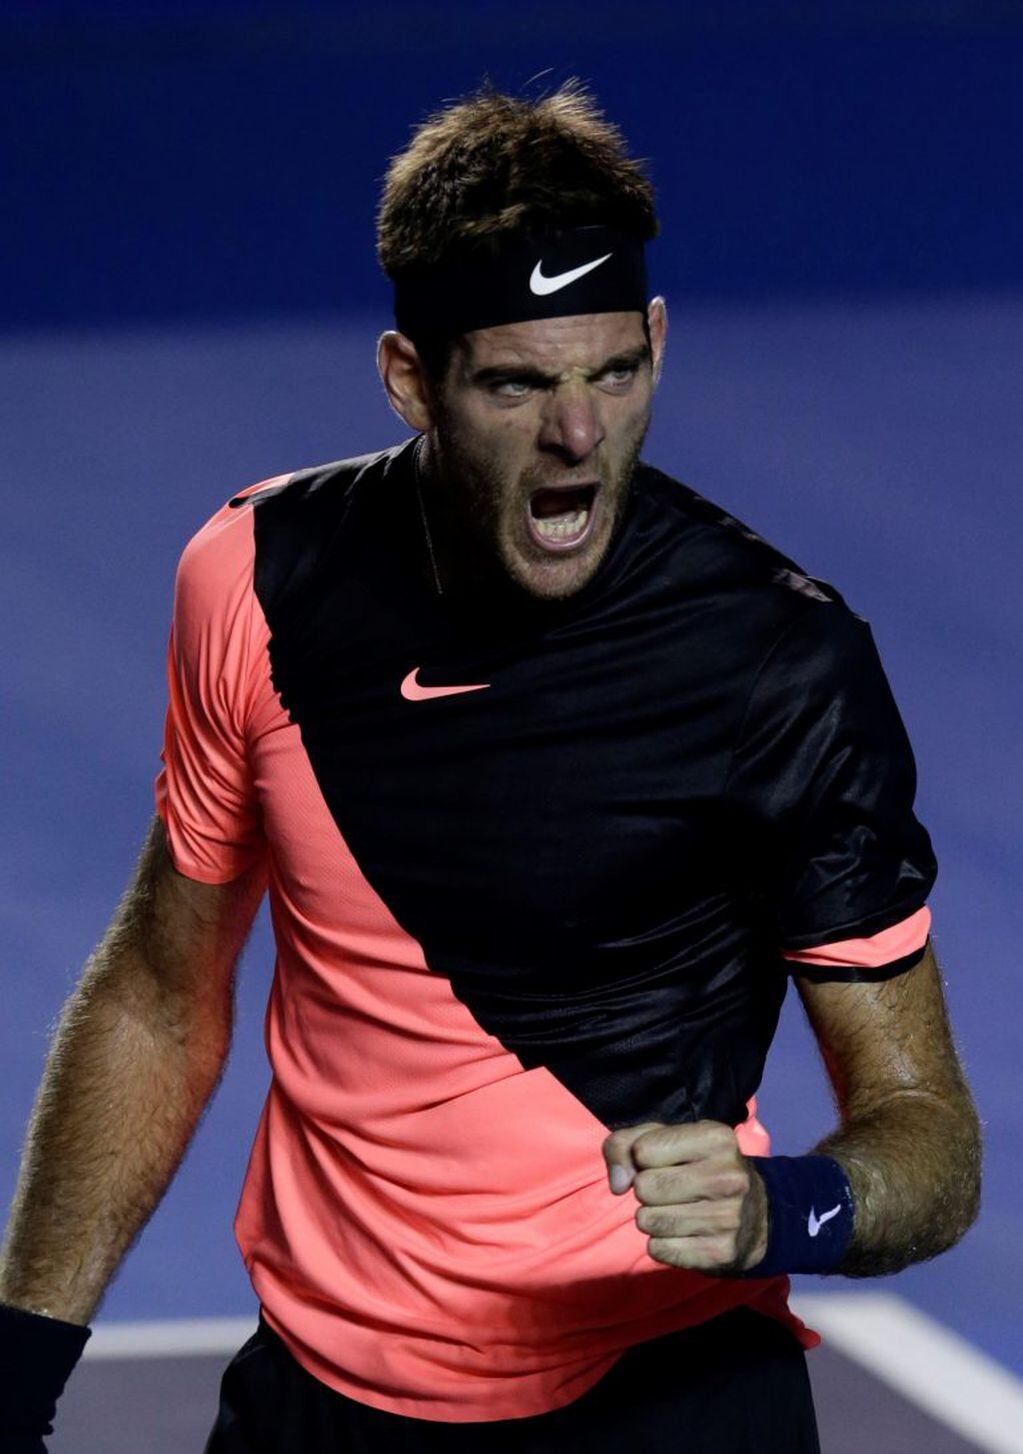 Argentina's Juan Martin Del Potro shouts after scoring match point against Germany's Alexander Zverev in their semifinal match against at the Mexican Tennis Open in Acapulco, Mexico, Friday, March 2, 2018.(AP Photo/Rebecca Blackwell)